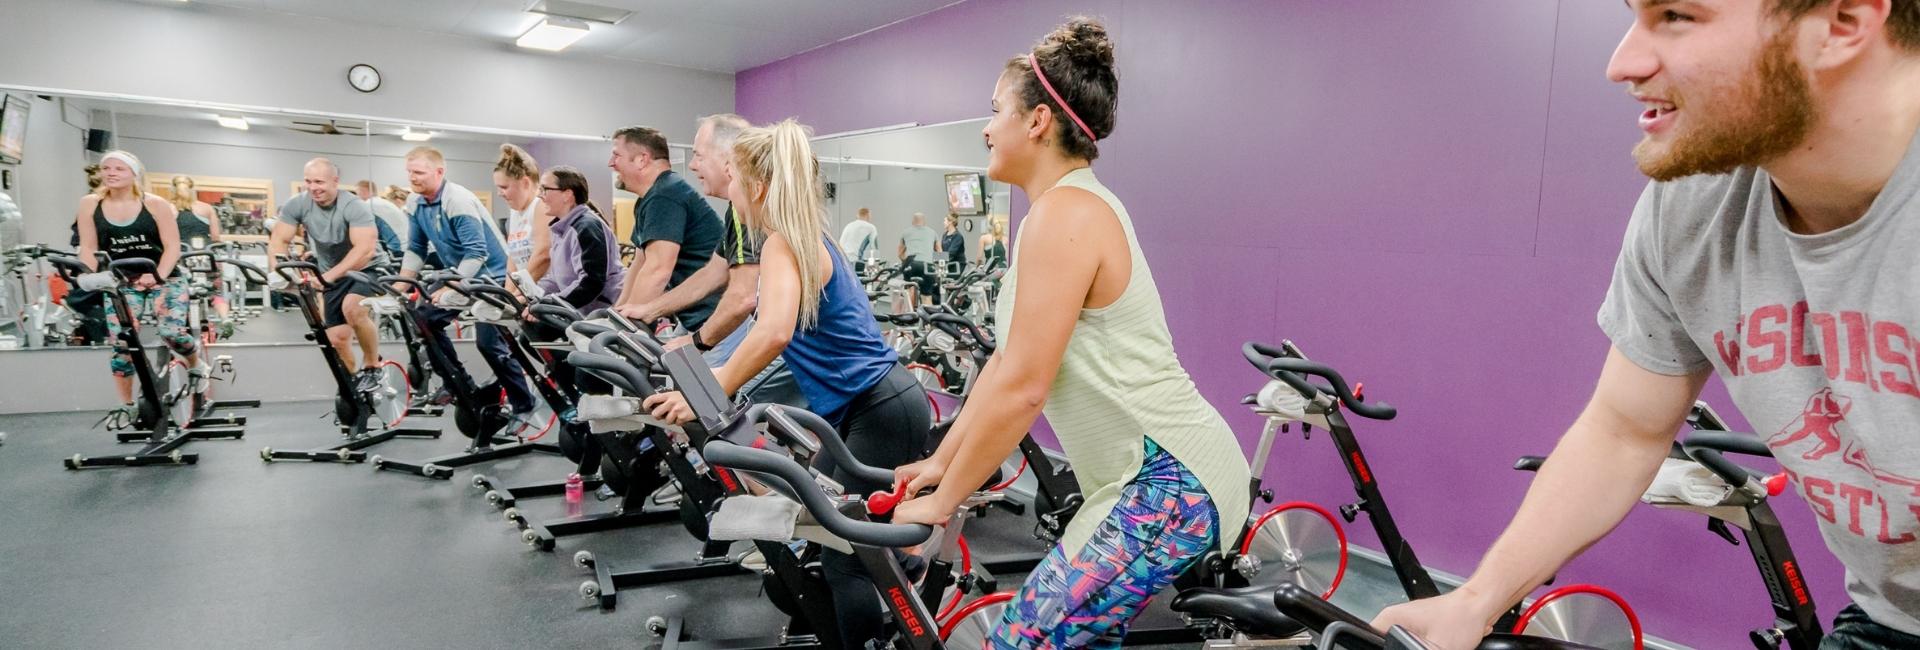 people in a spin fitness class